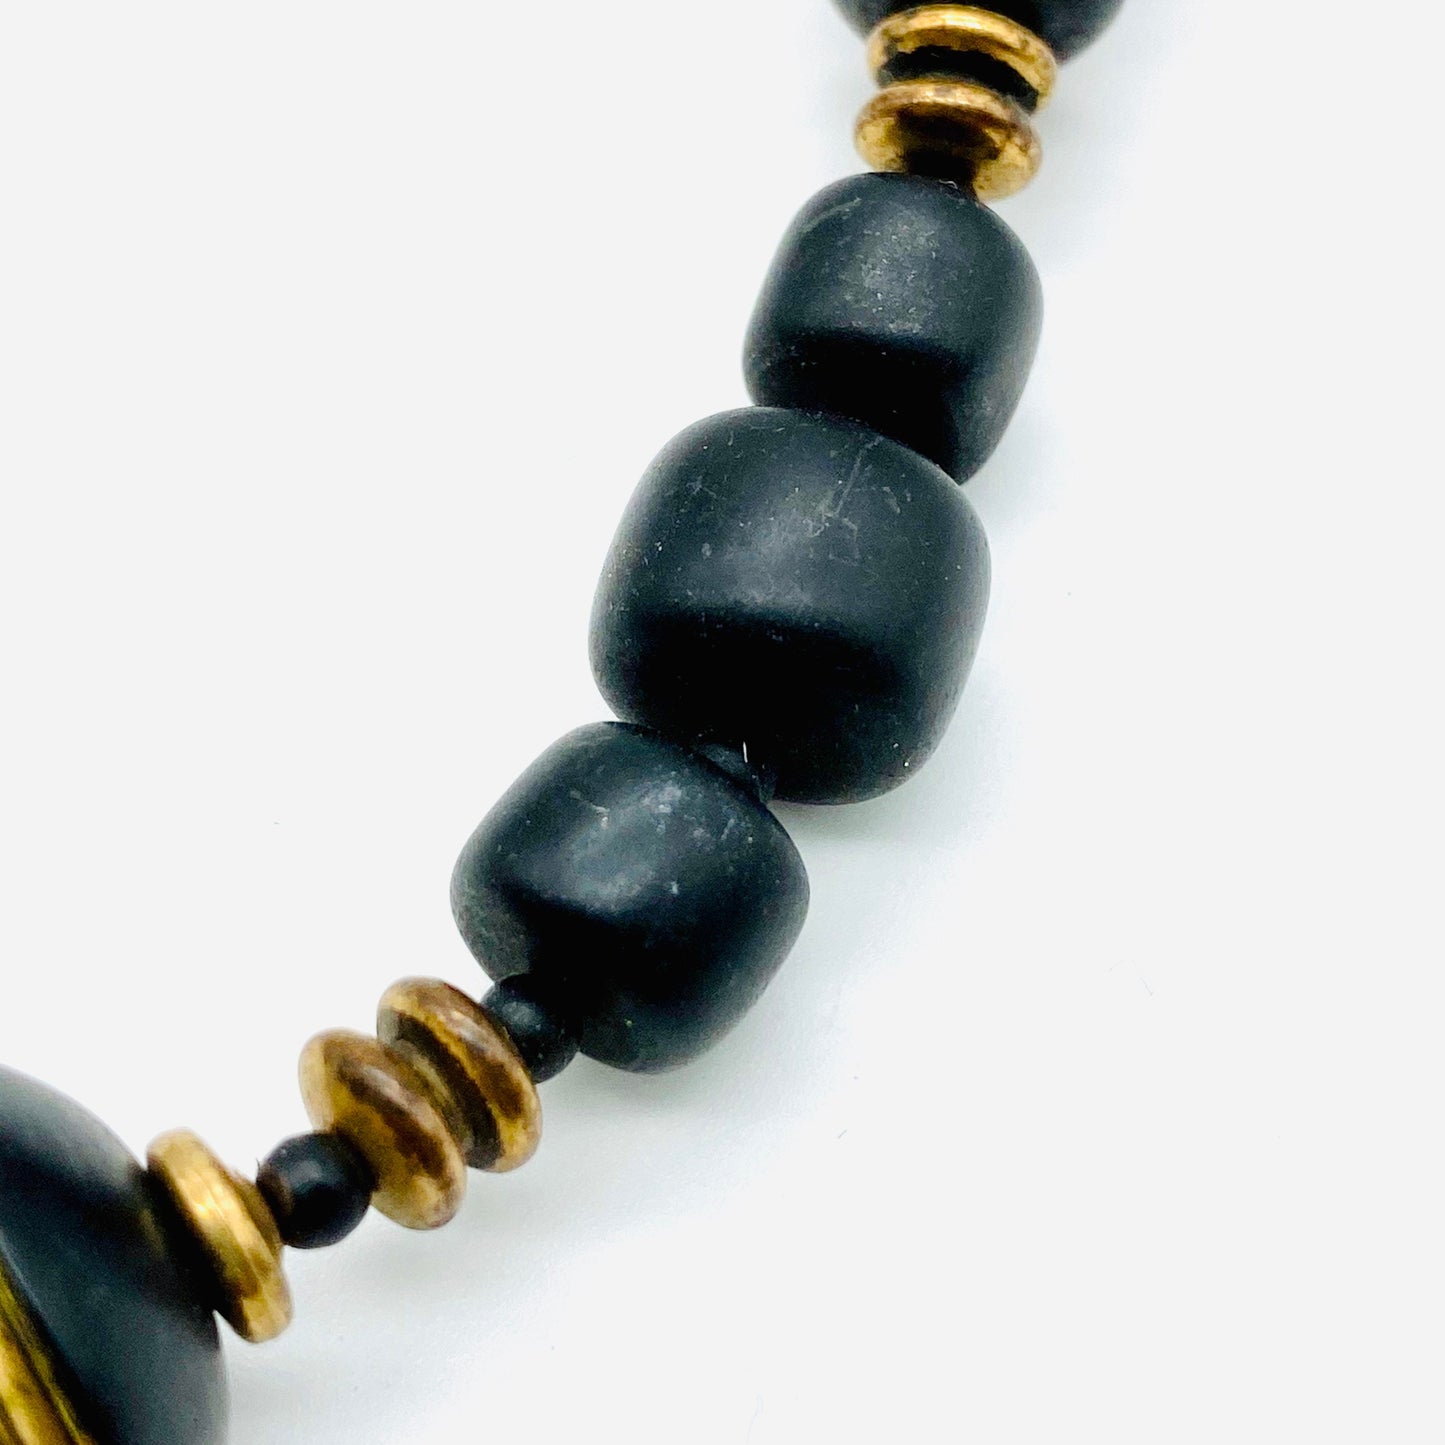 Miriam Haskell Wooden Bead Necklace